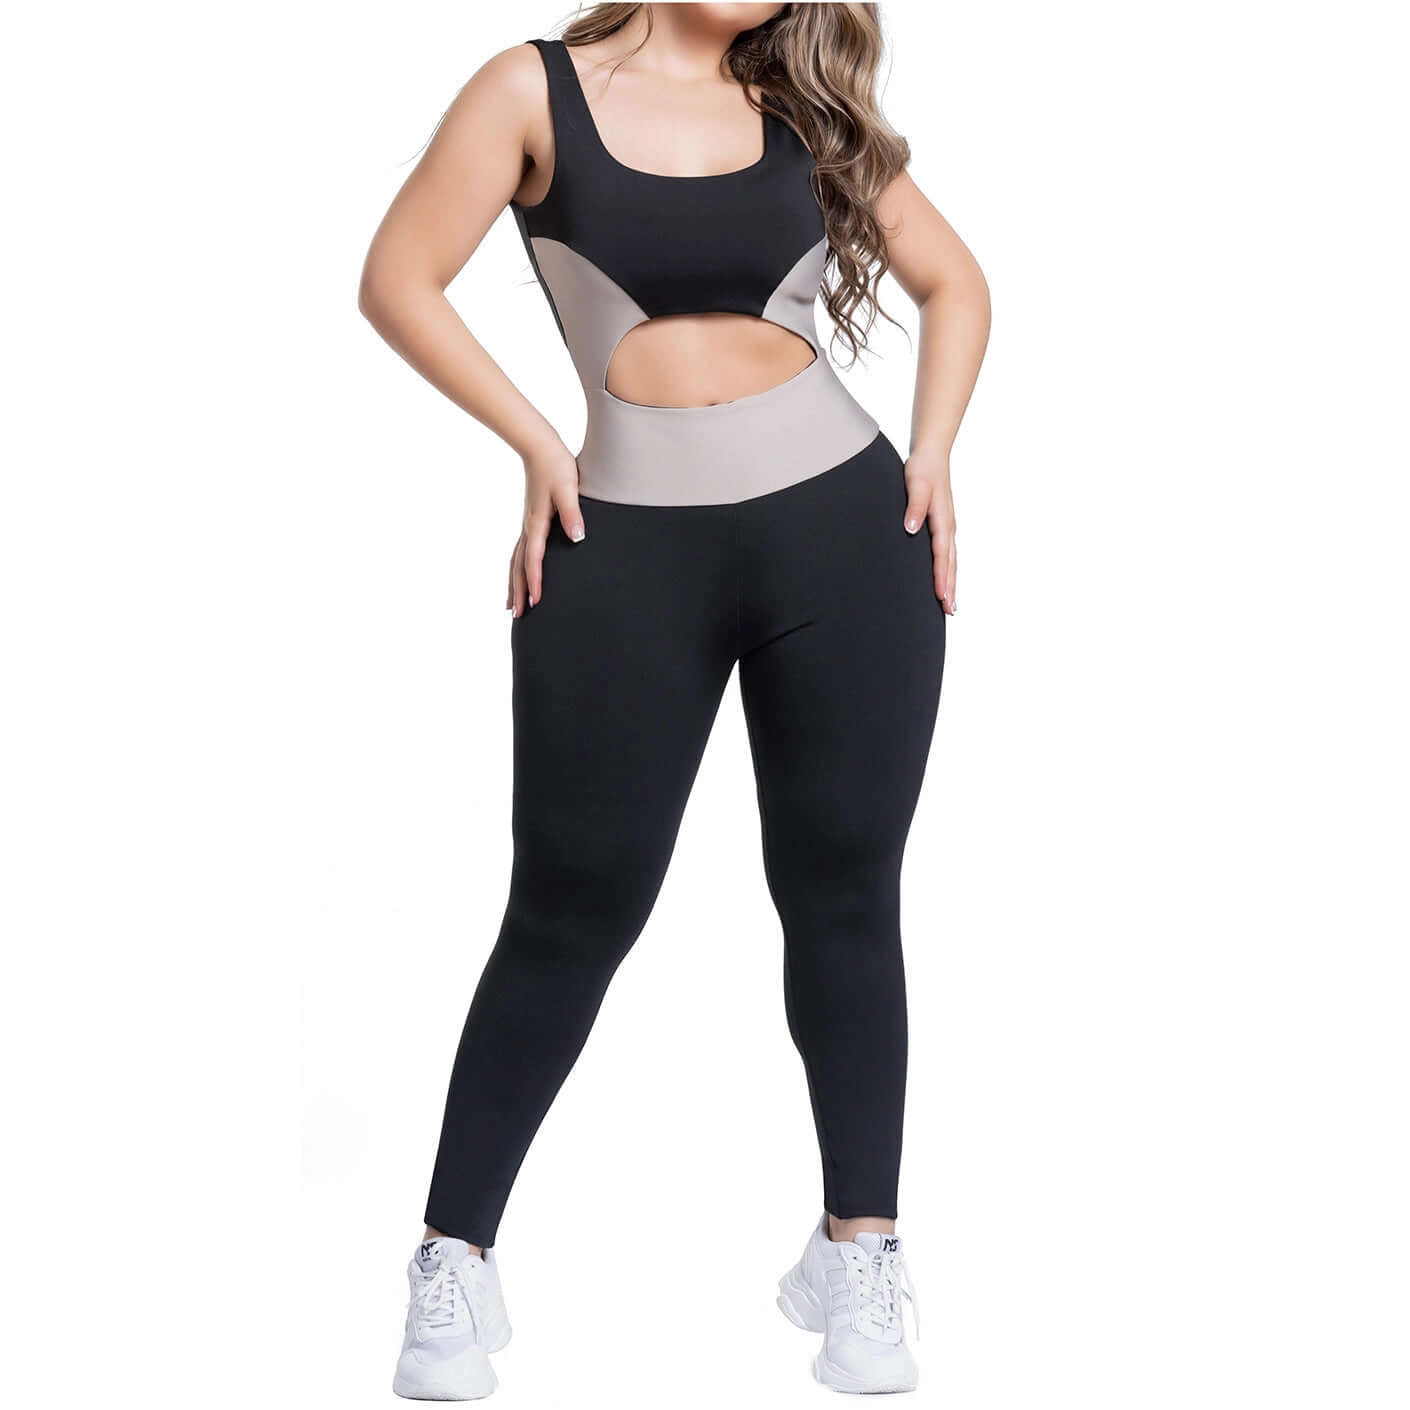 HIGH WAISTED SPORT ONE PIECE WITH ACTIVEWEAR BRA FOR WOMEN | SHAPE LINE